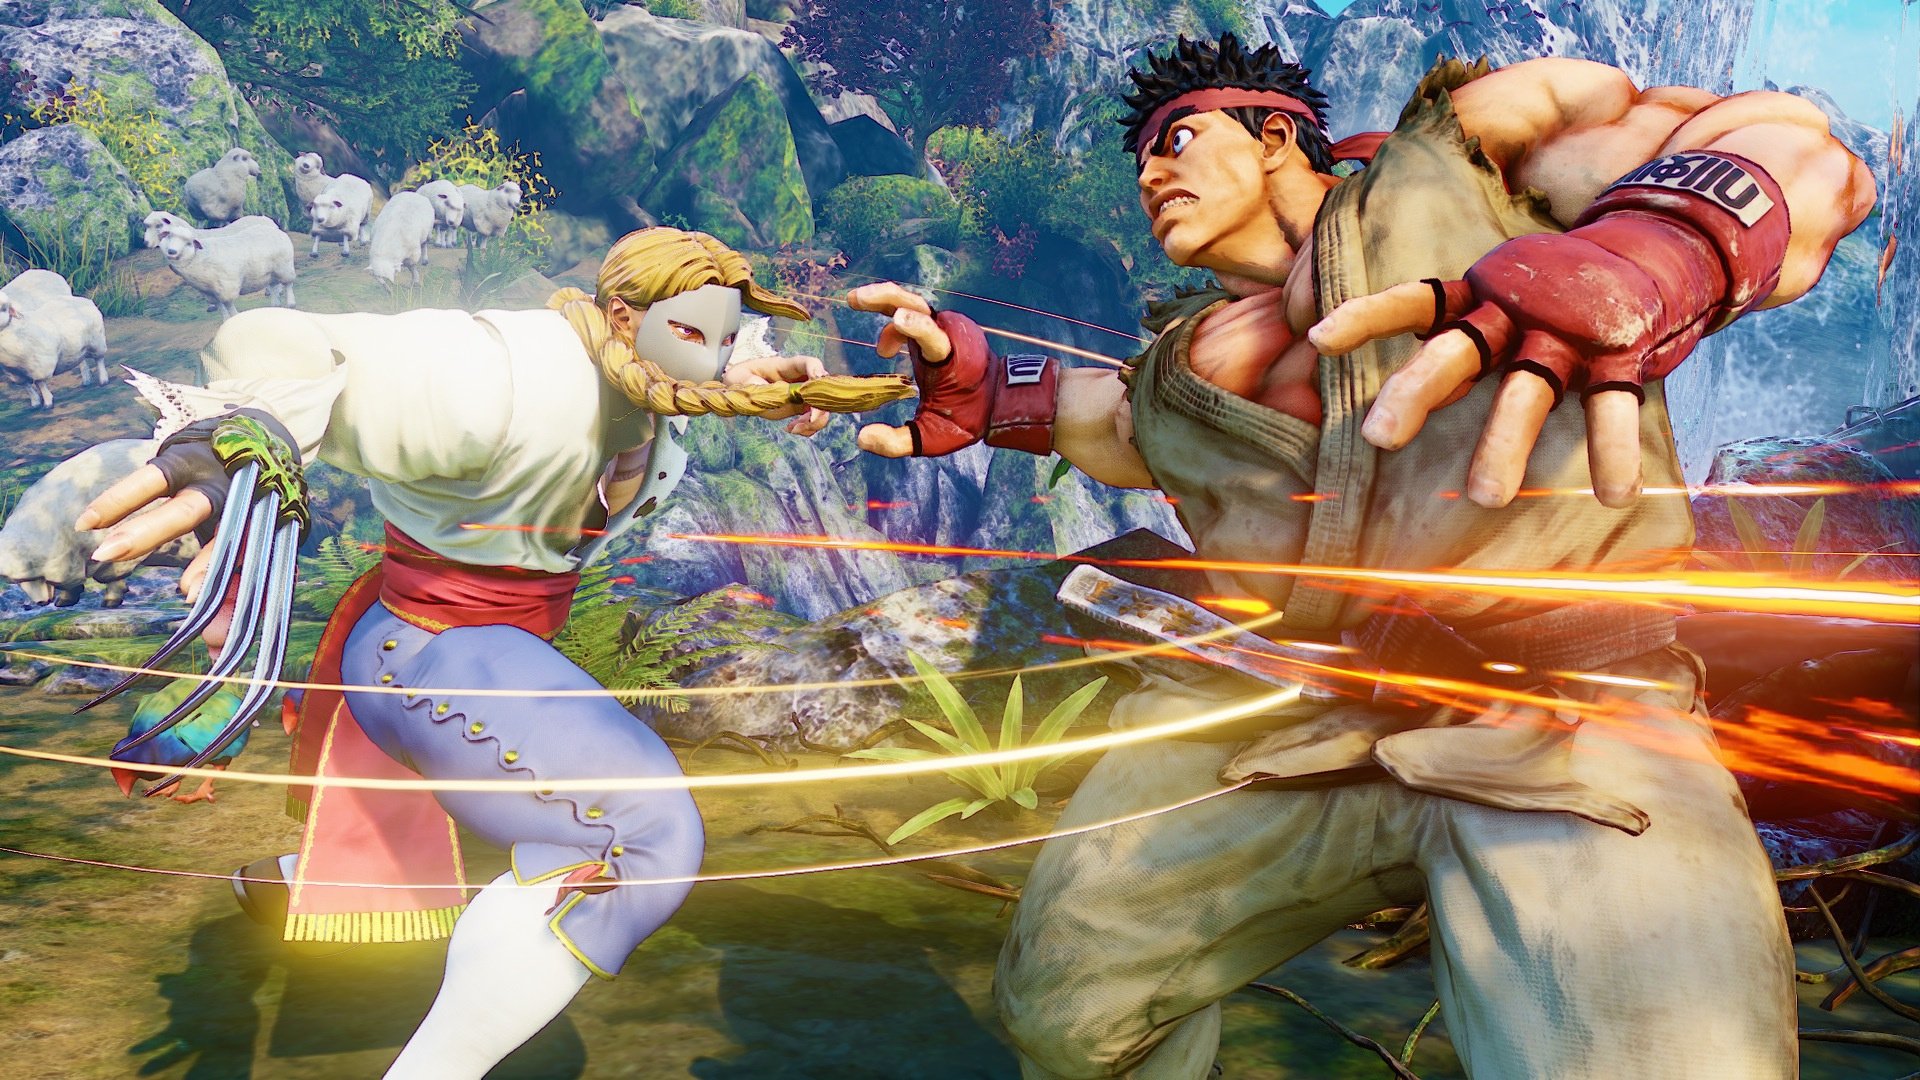 ps4 street fighter 6